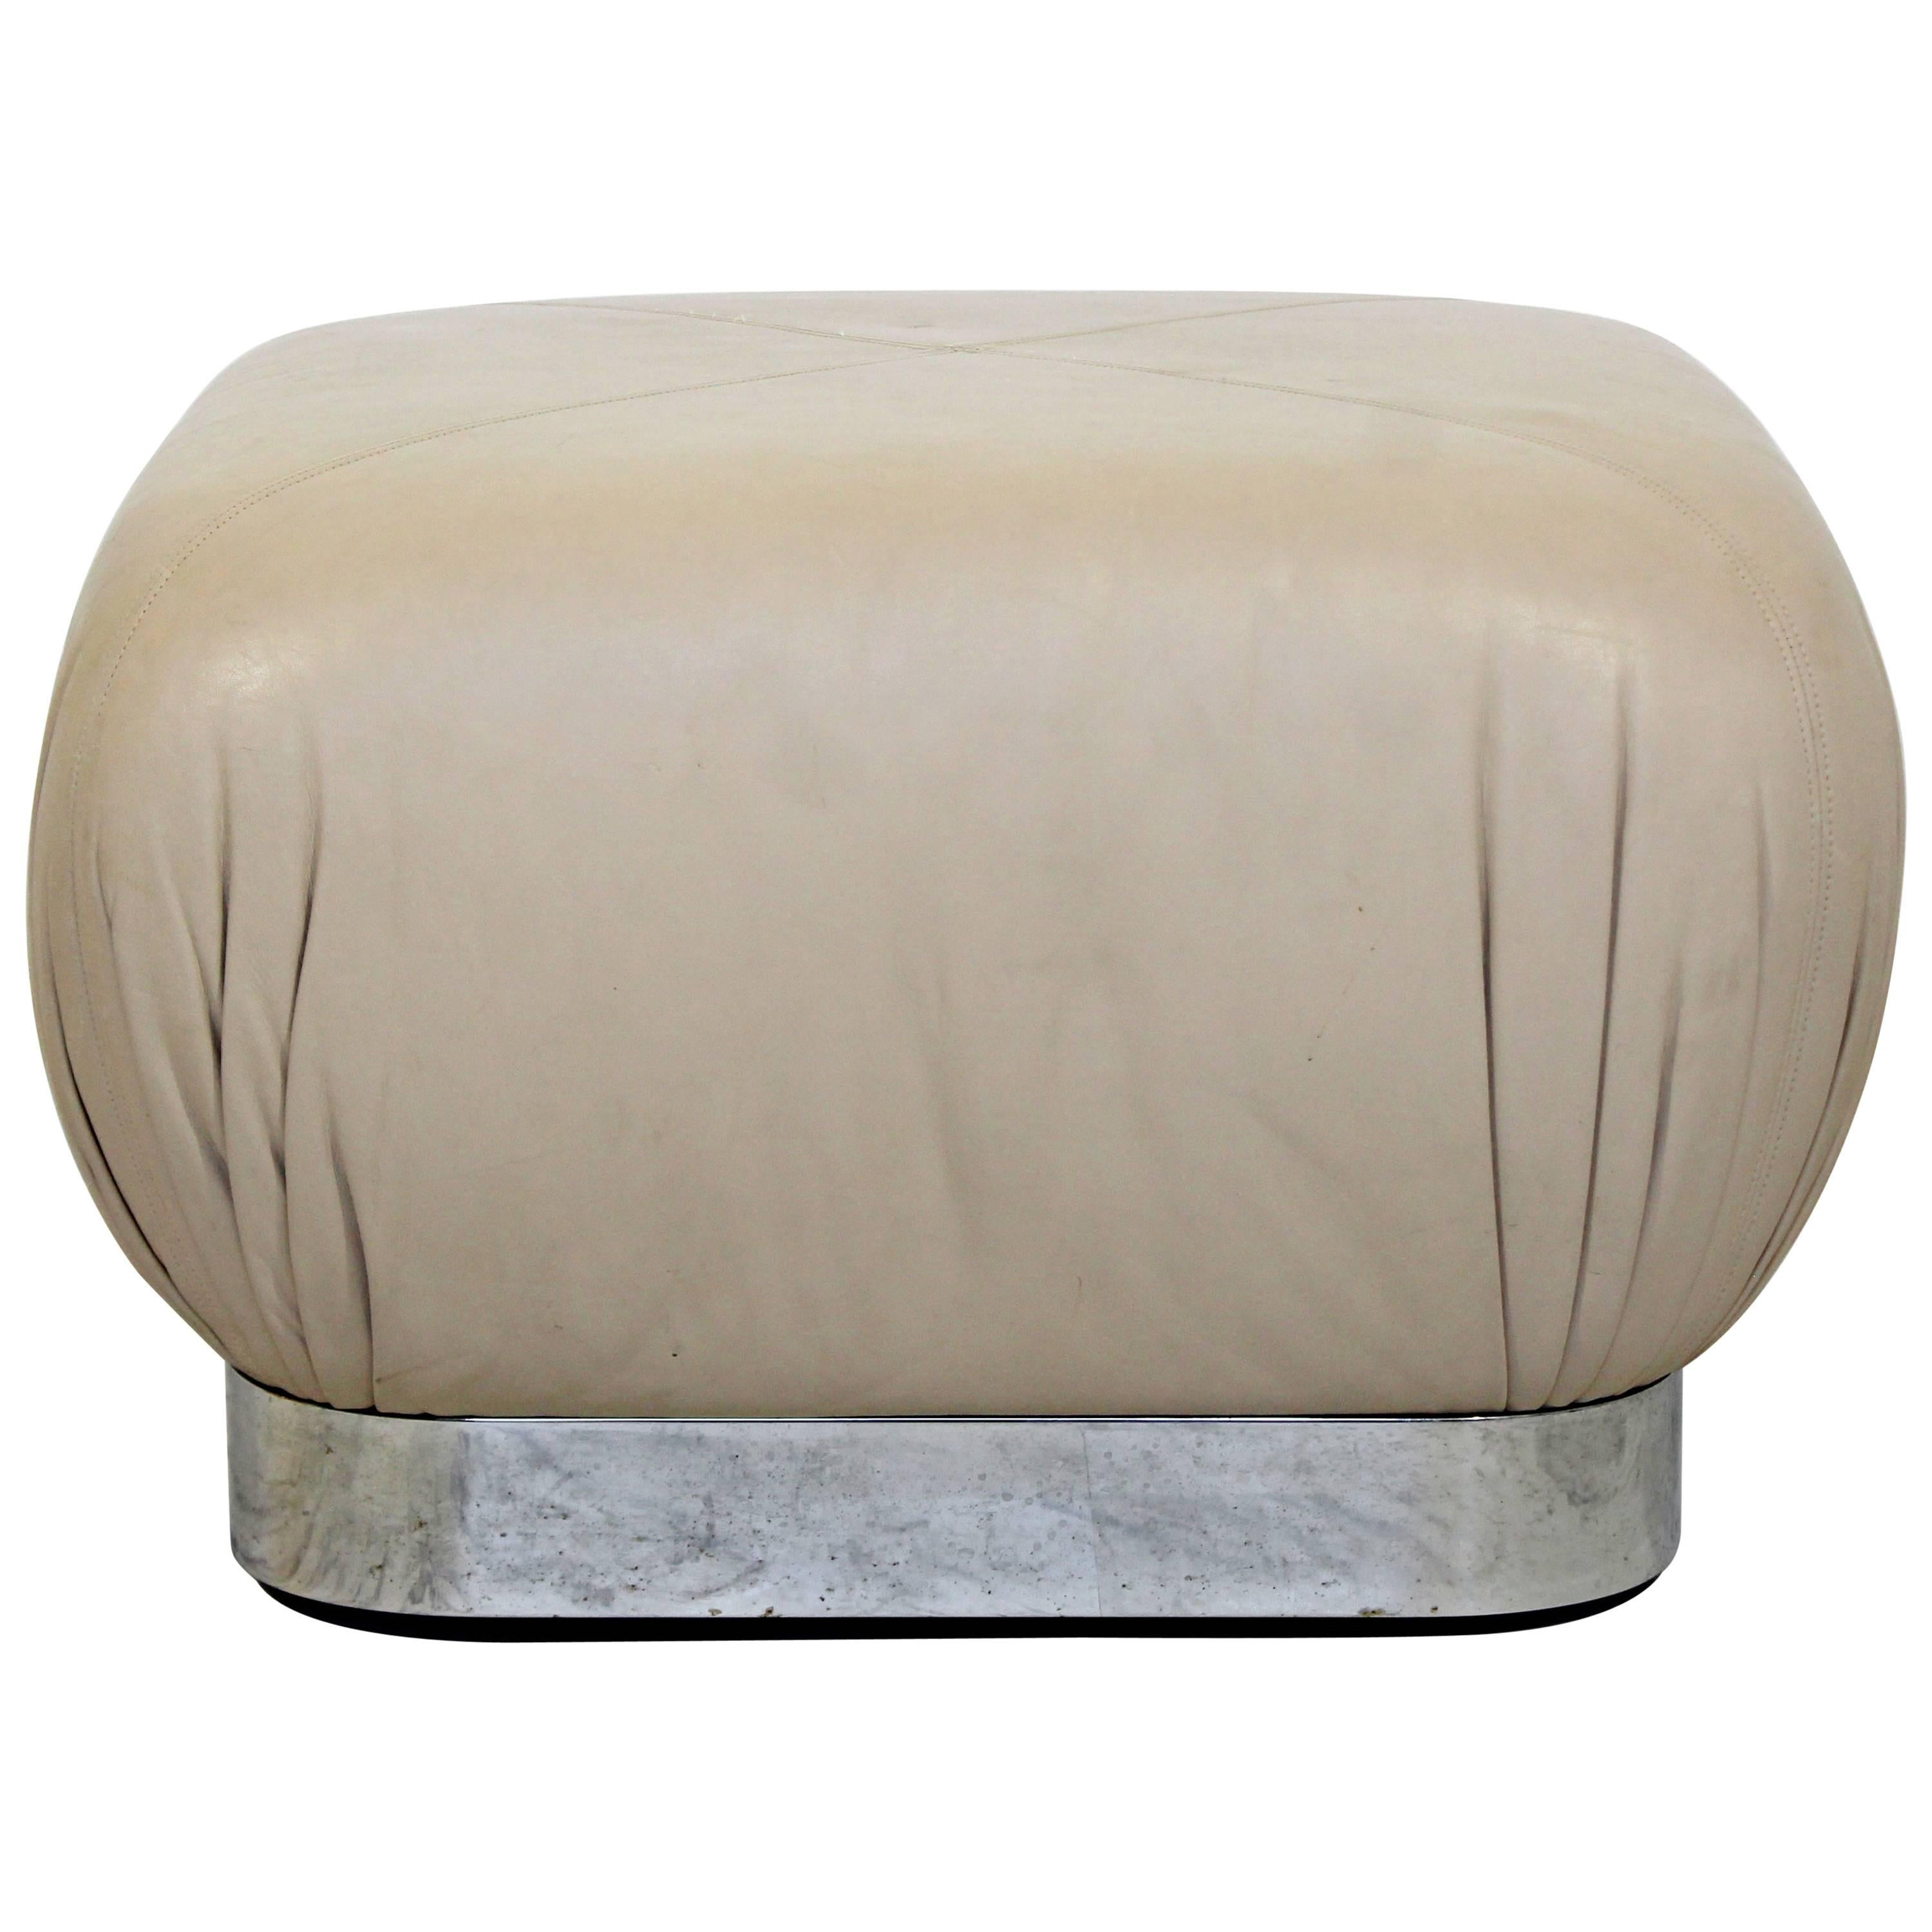 Mid-Century Modern Preview Chrome Beige Leather Ottoman Pouf Casters Springer